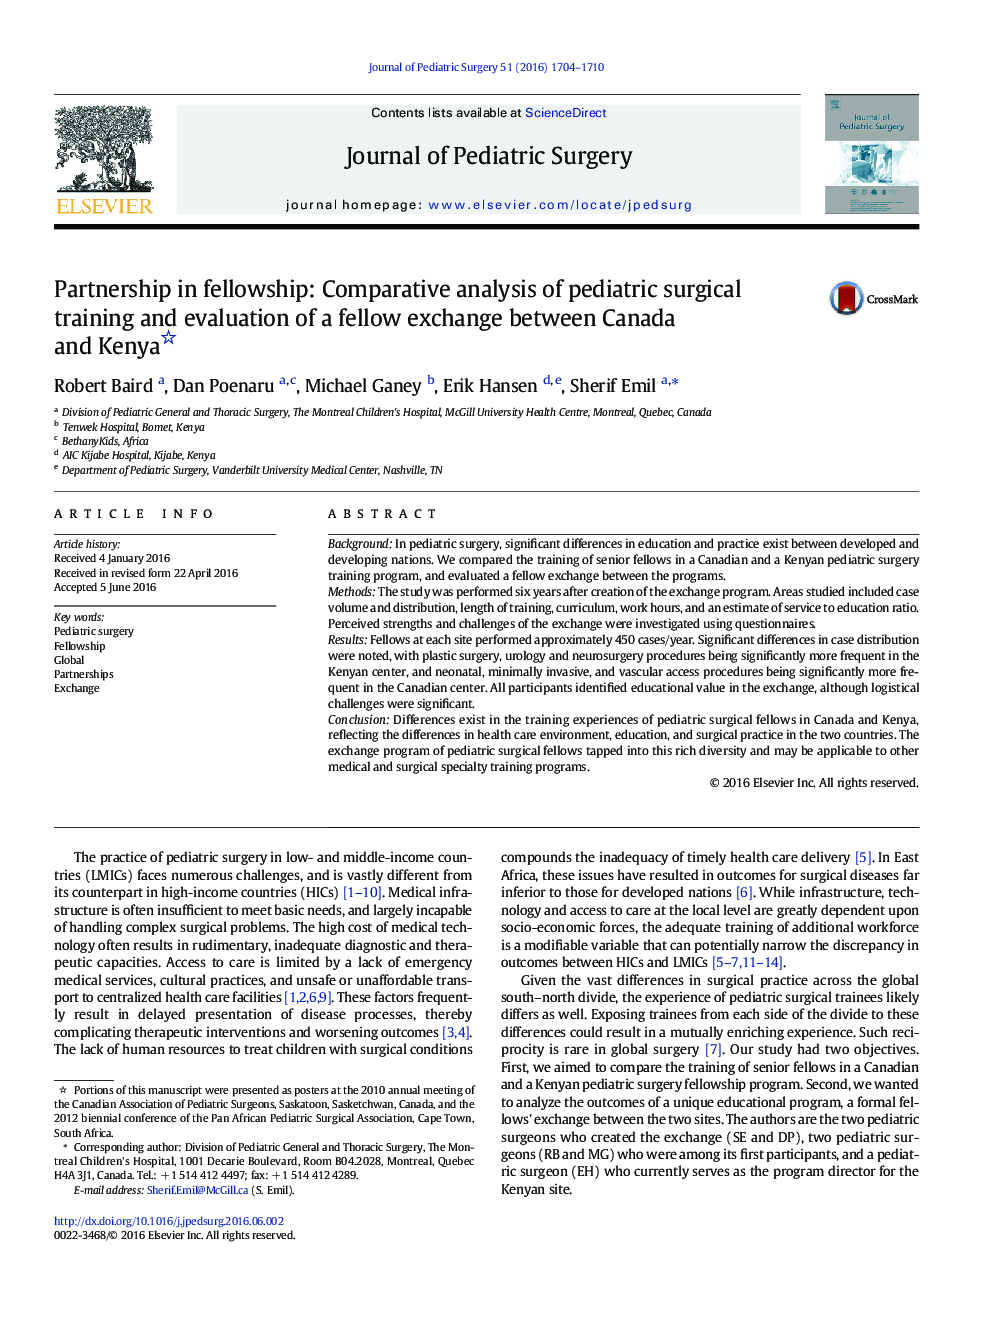 Partnership in fellowship: Comparative analysis of pediatric surgical training and evaluation of a fellow exchange between Canada and Kenya 